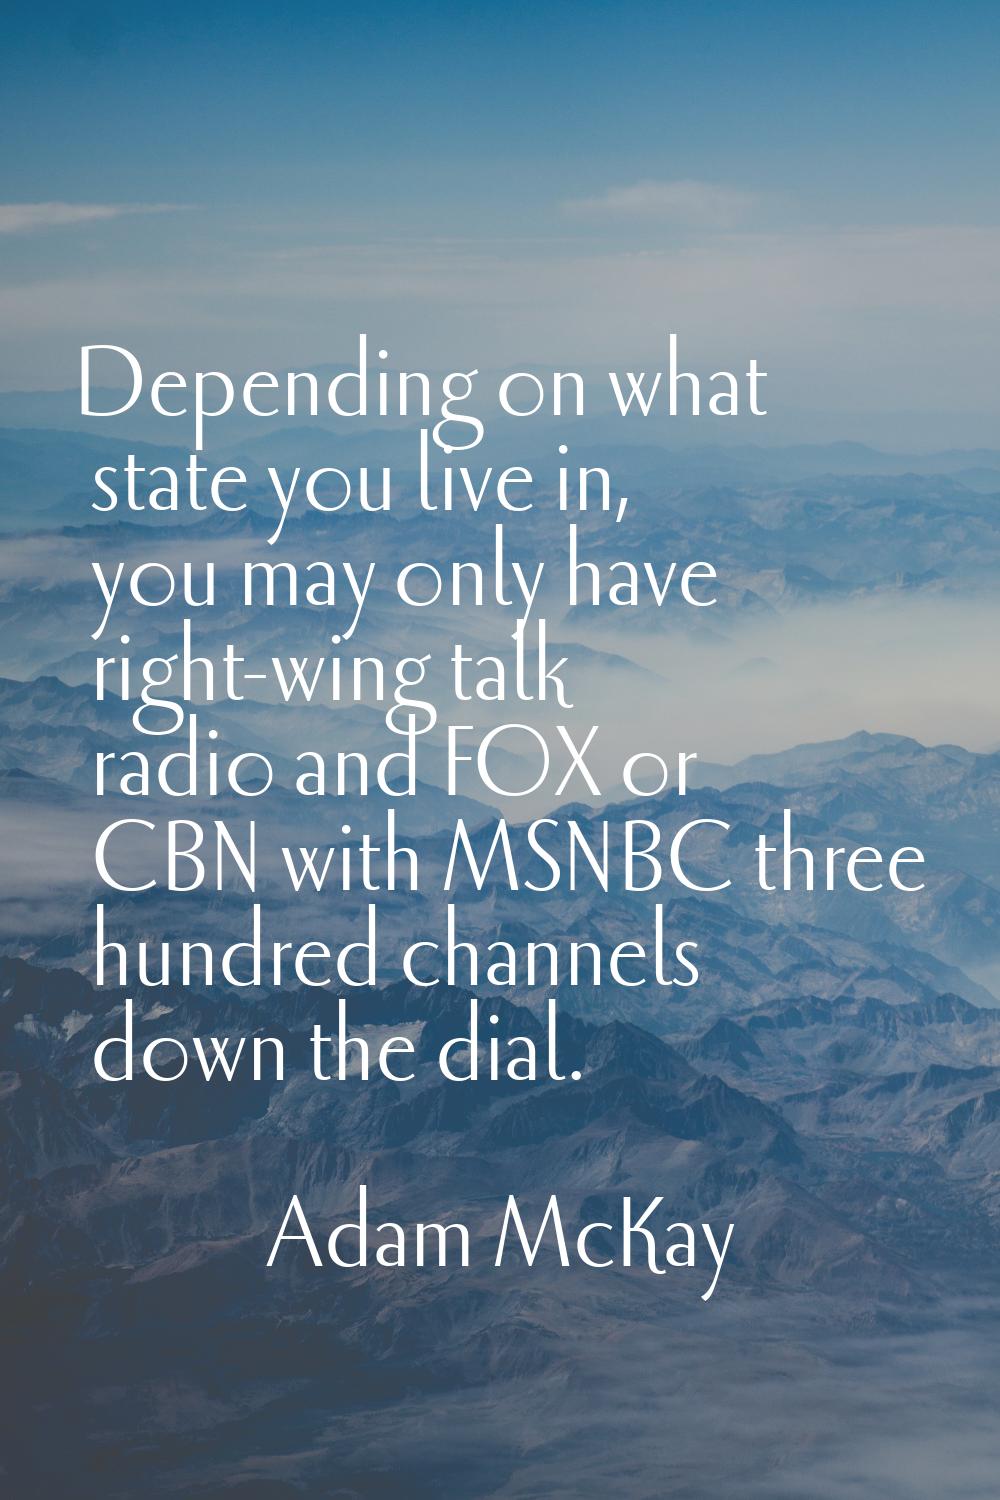 Depending on what state you live in, you may only have right-wing talk radio and FOX or CBN with MS